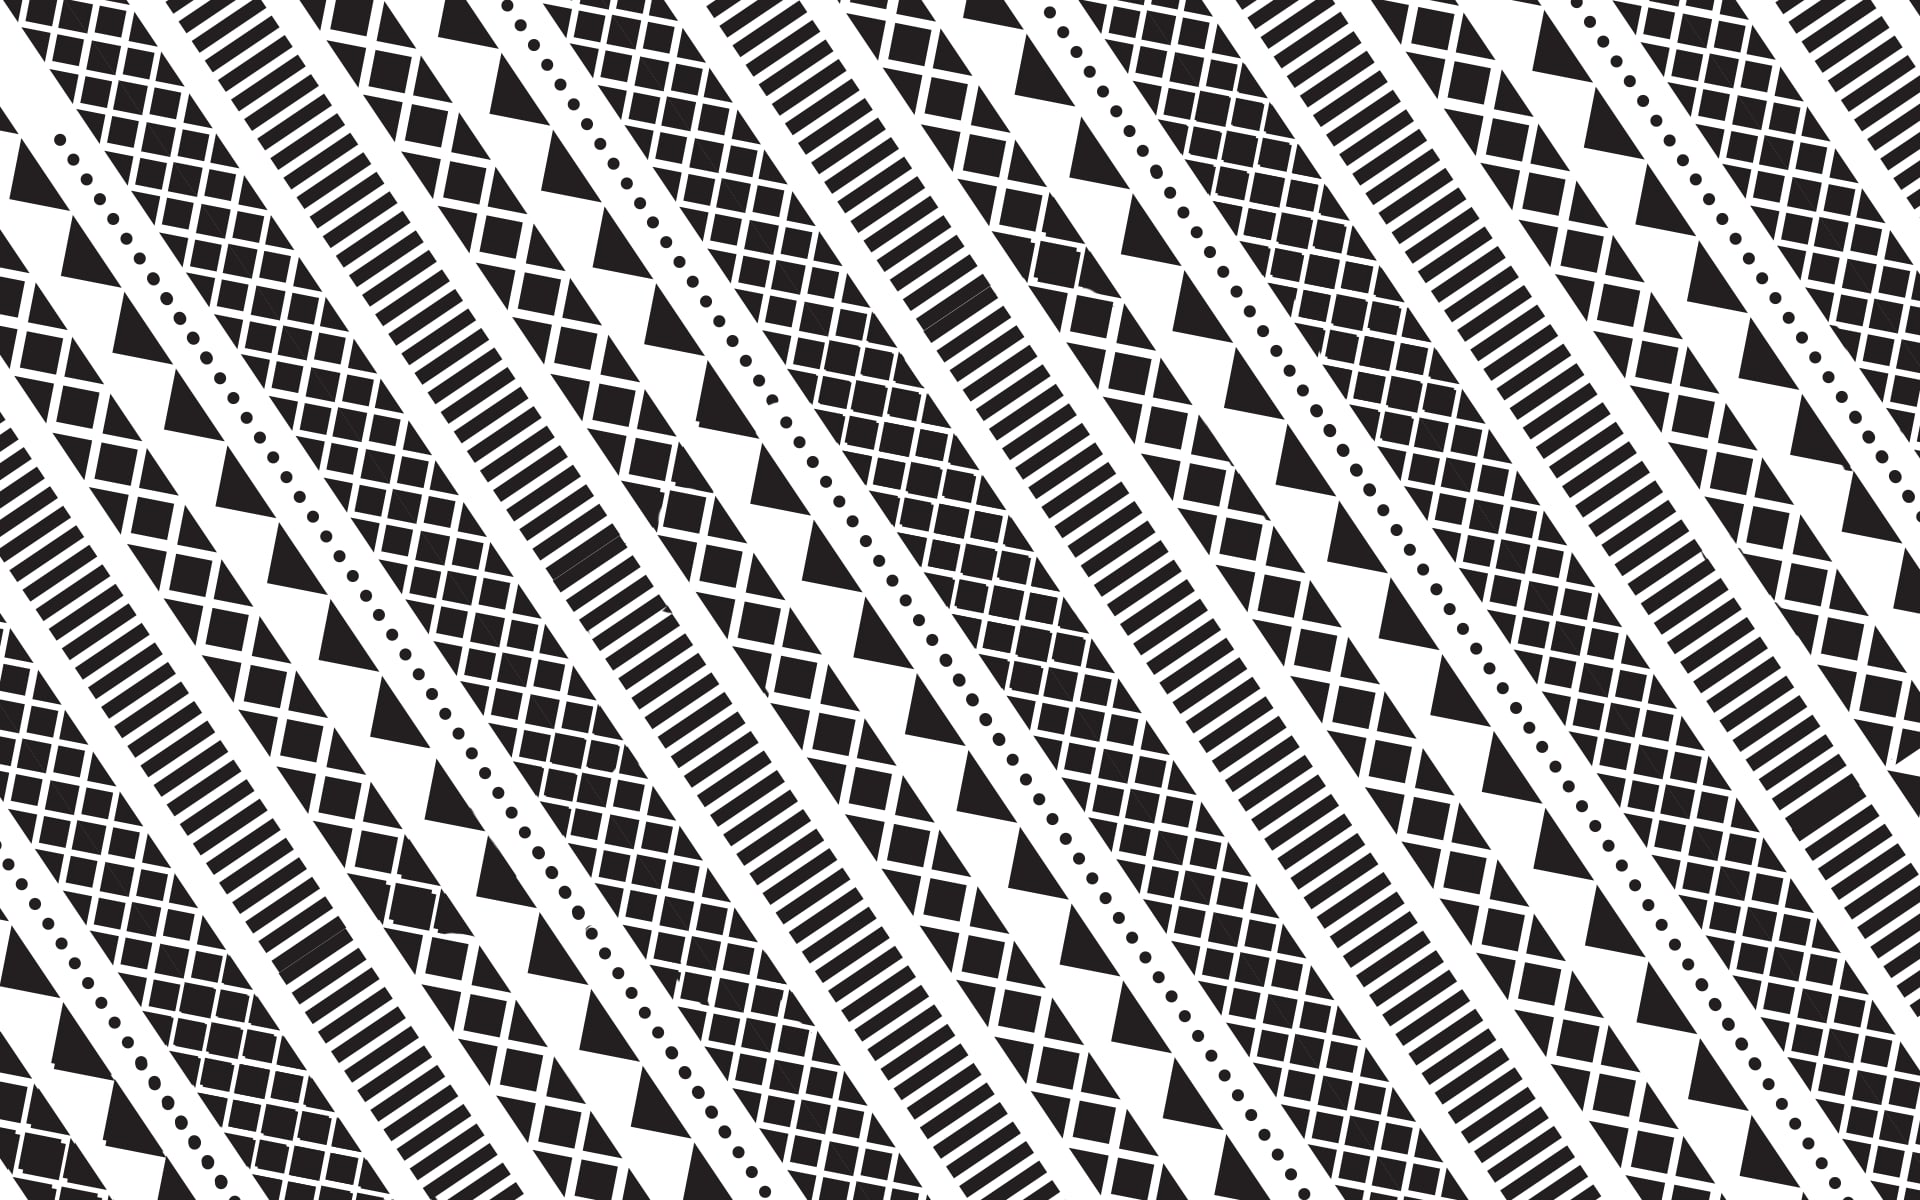 Tribal 30 Pretty iPhone Wallpapers That Dont Cost a Thing 1920x1200